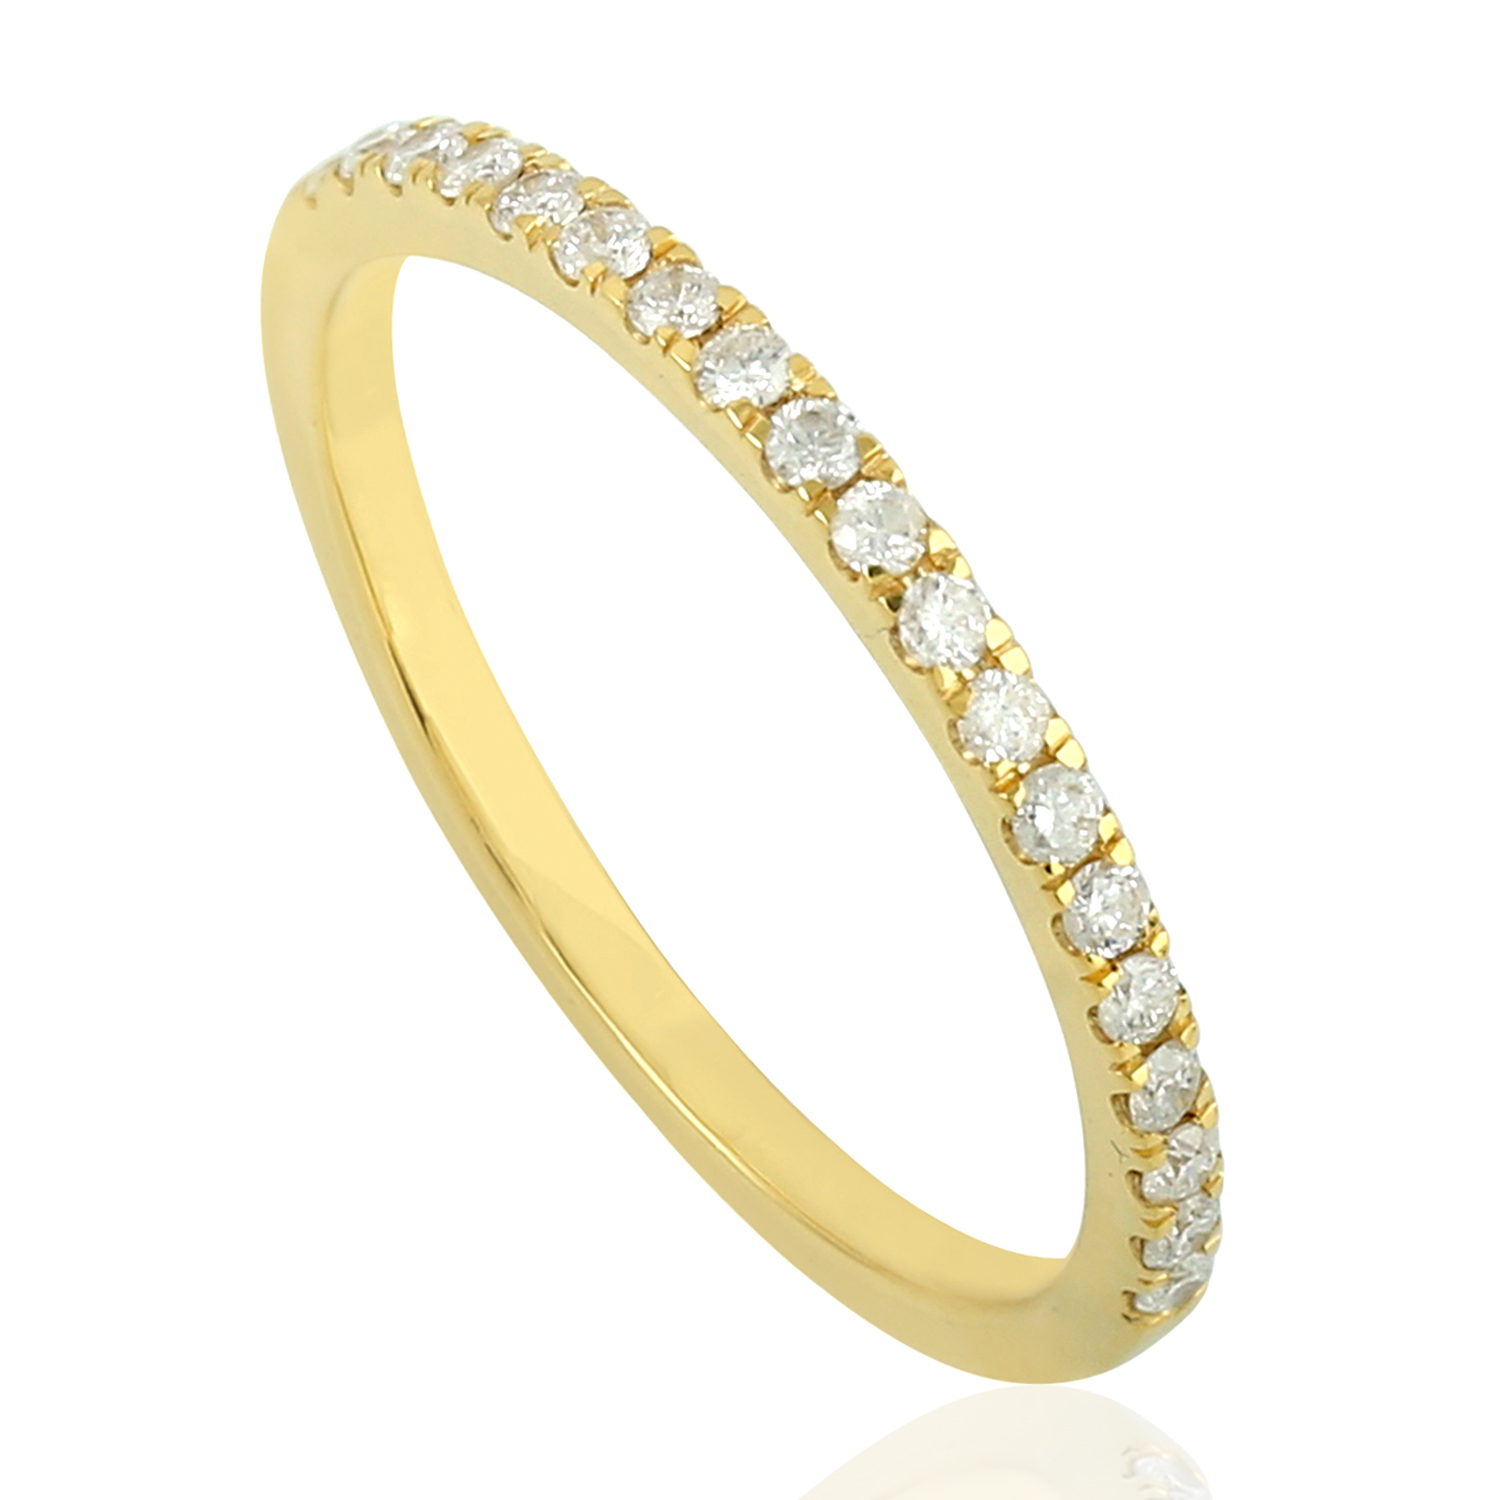 18kt Solid Yellow Gold Pave Diamond Eternity Band Ring Jewelry For Women's Gift 